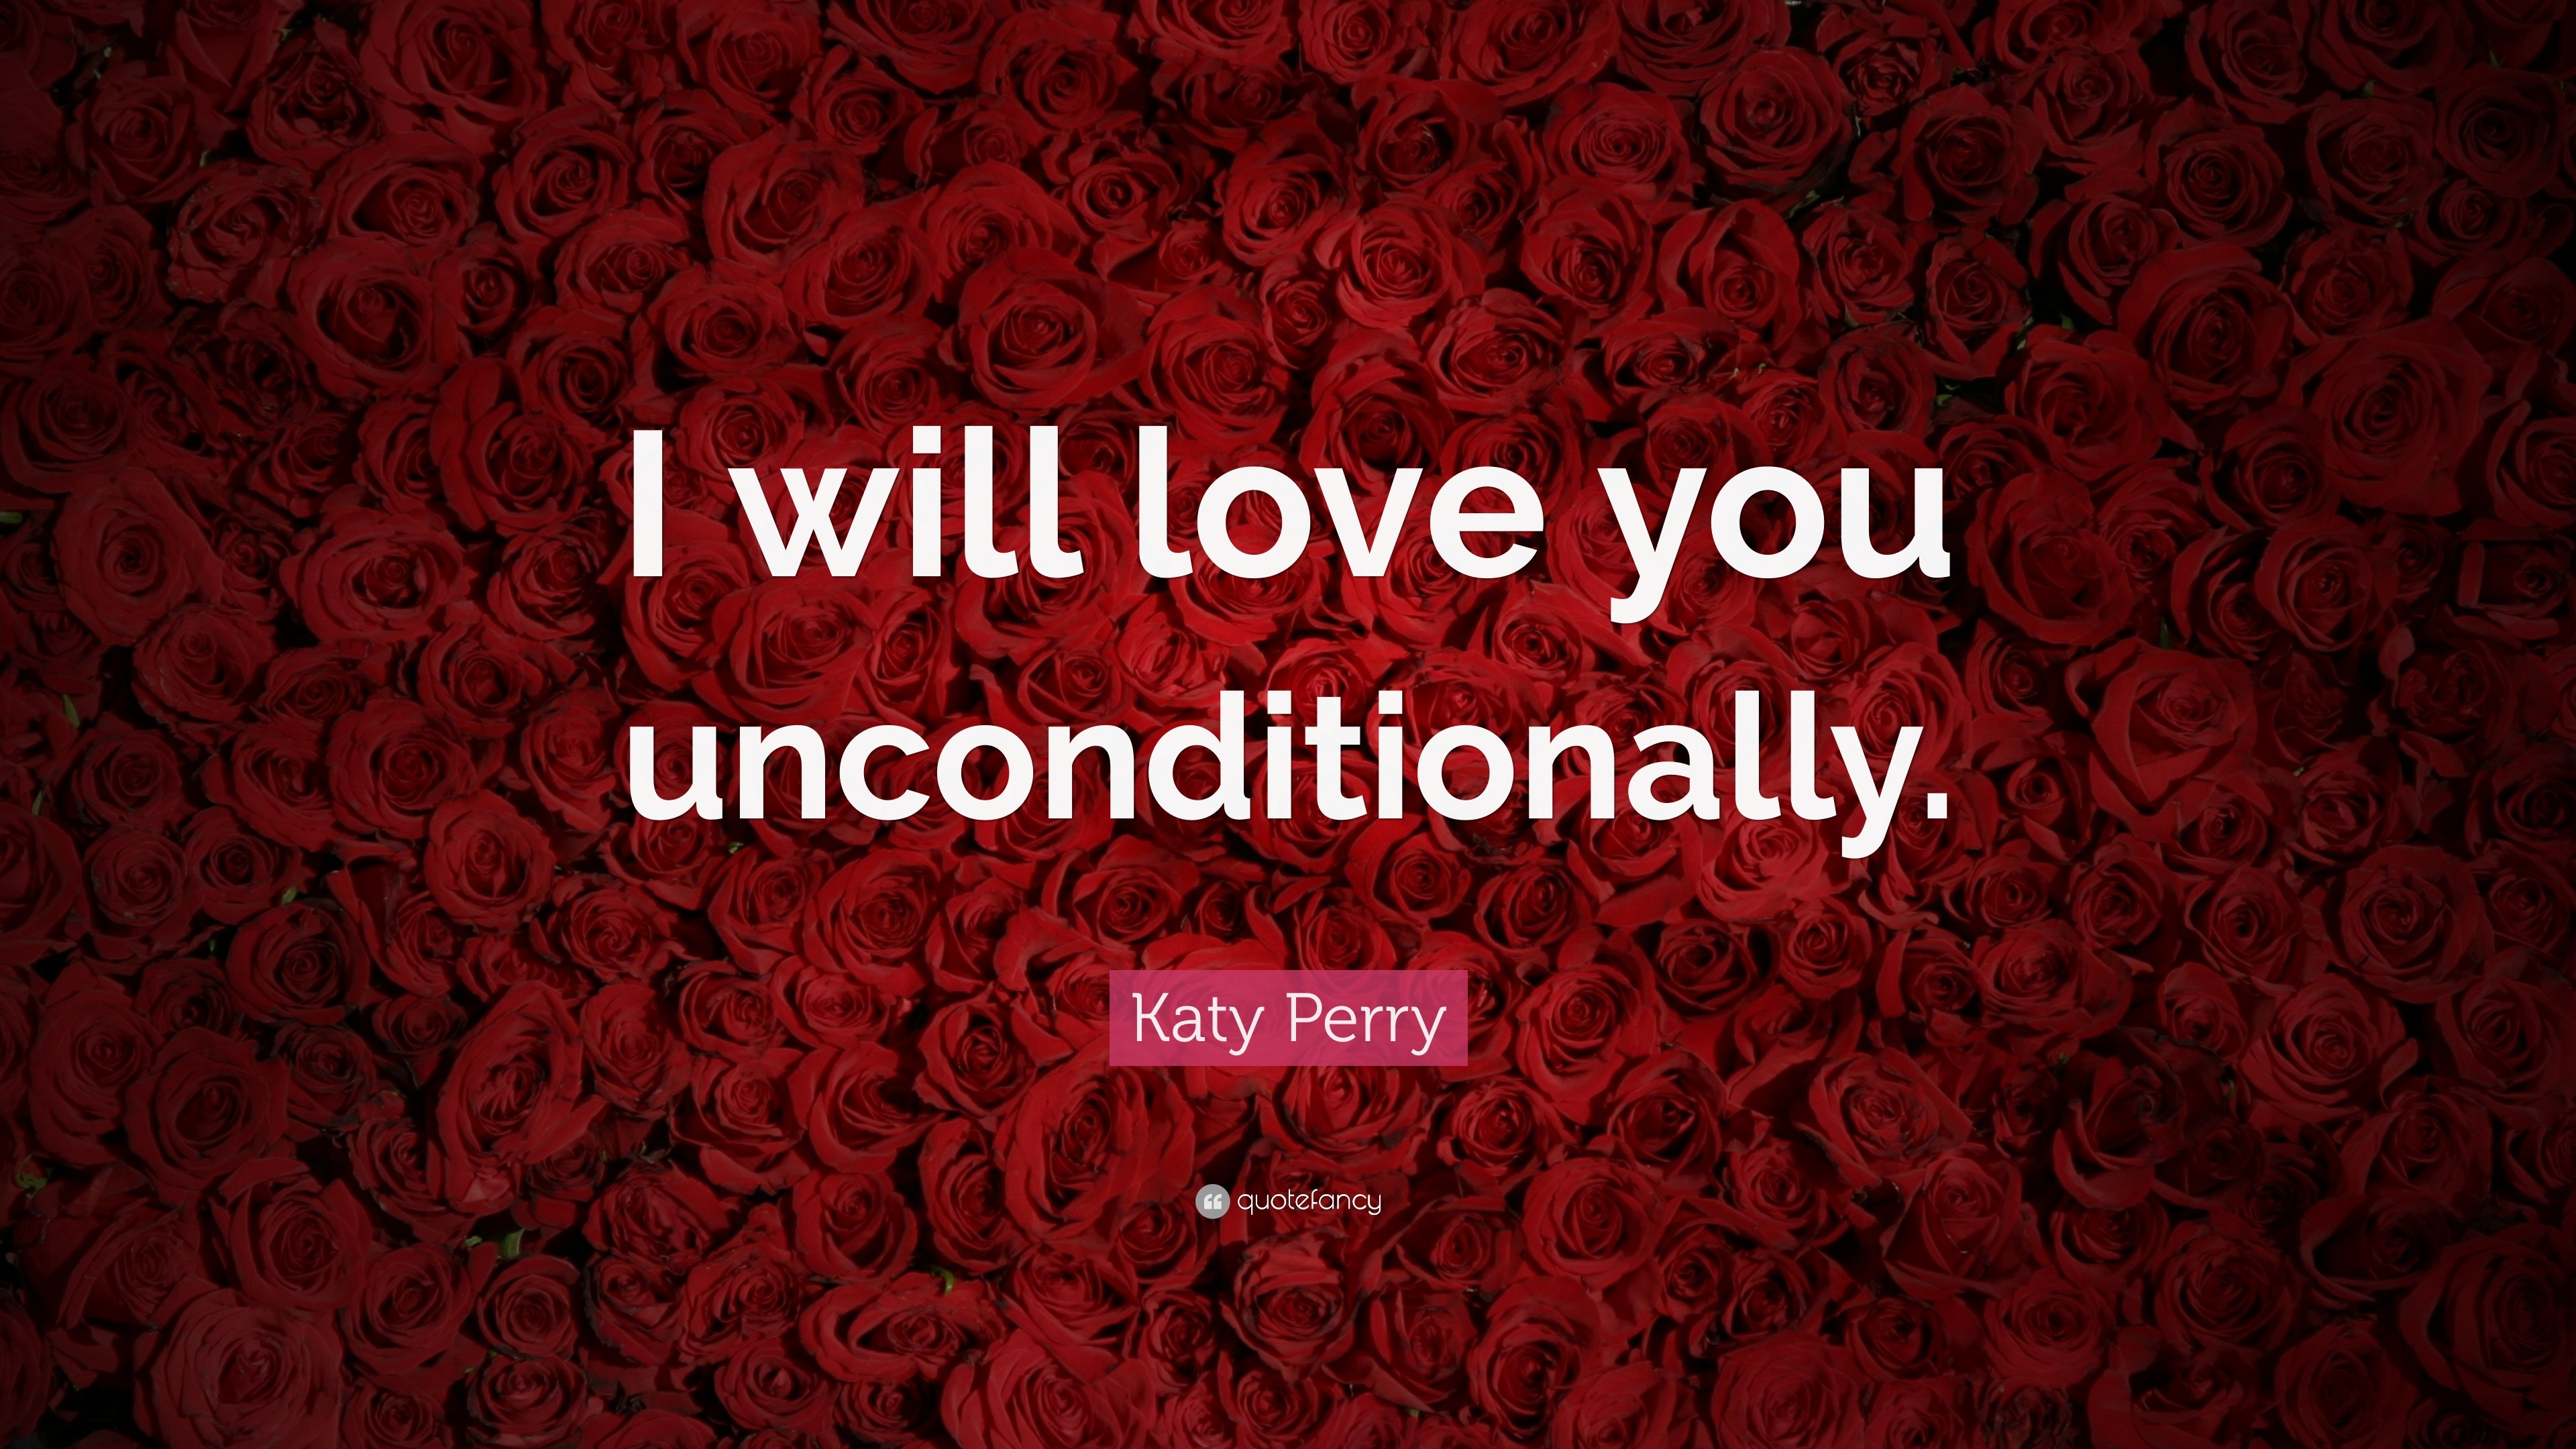 Katy Perry Quote I will love you unconditionally 16